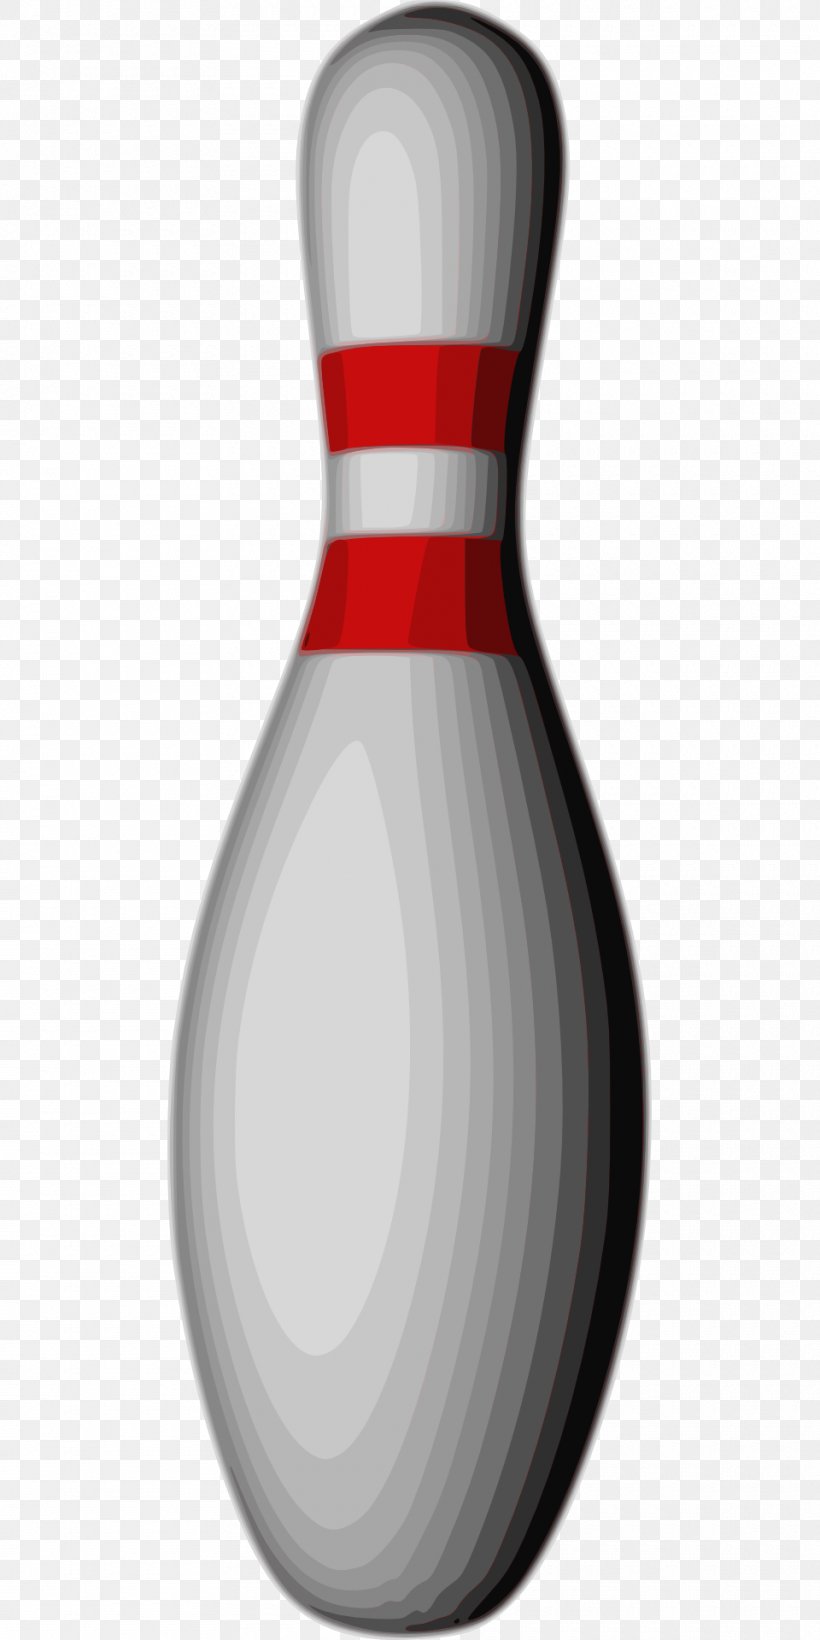 Bowling Pin Product Design Clip Art, PNG, 960x1920px, Bowling Pin, Bowling, Bowling Equipment Download Free